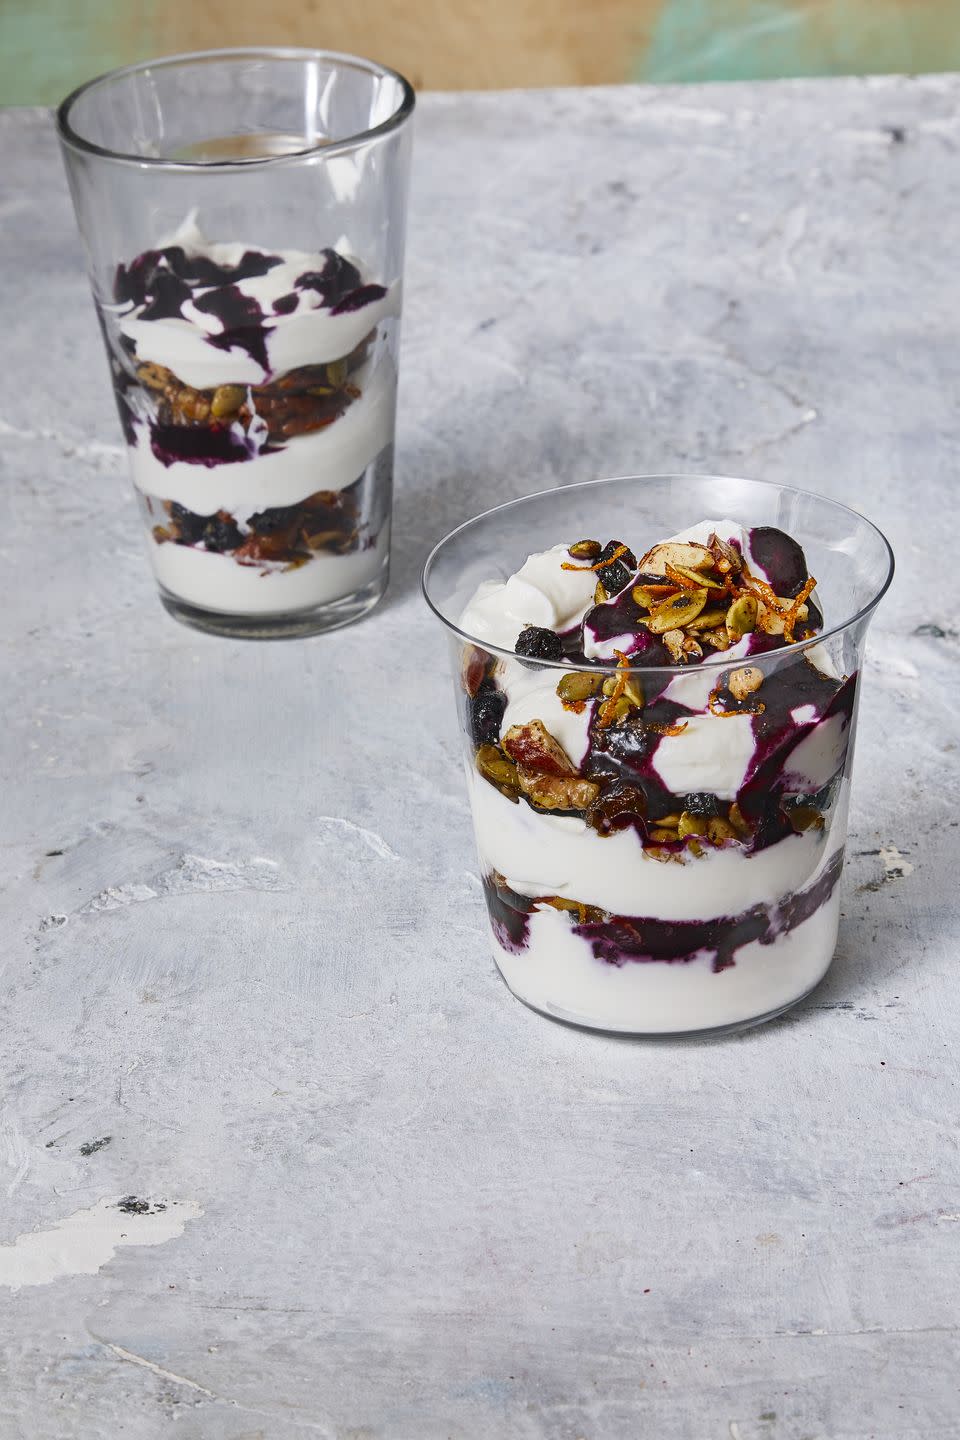 8) Blueberry-and-Mixed Nut Parfait